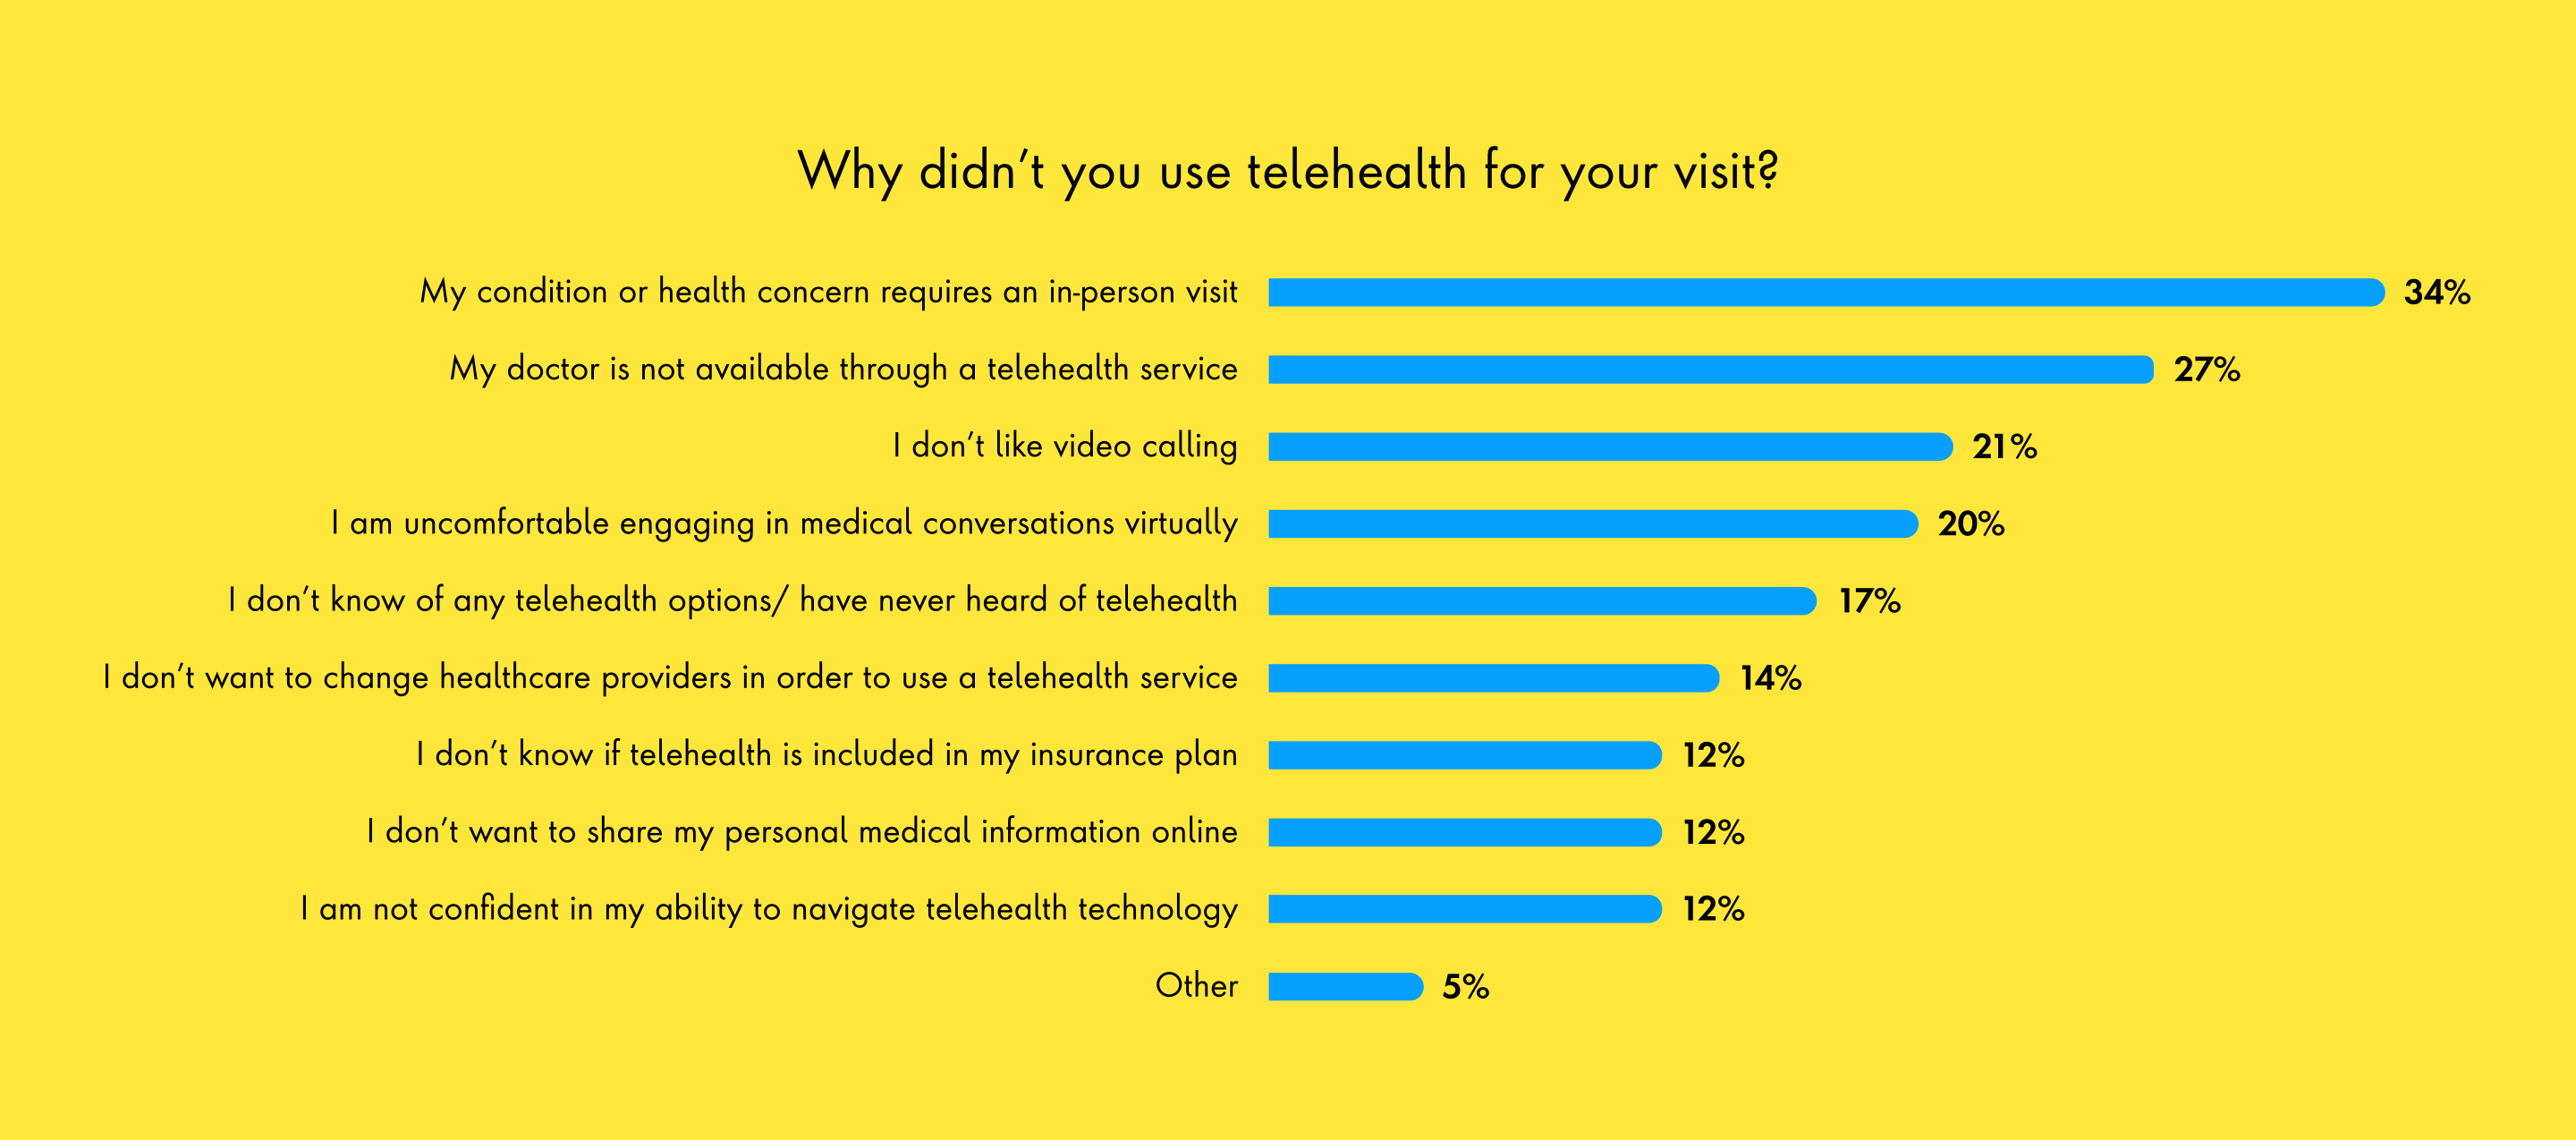 Chart Why didnt you use telemedicine for your visit? Top reasons were 1. Their condition or health concern required and in-person visit and 2. their doctor was not available through telemedicine service.